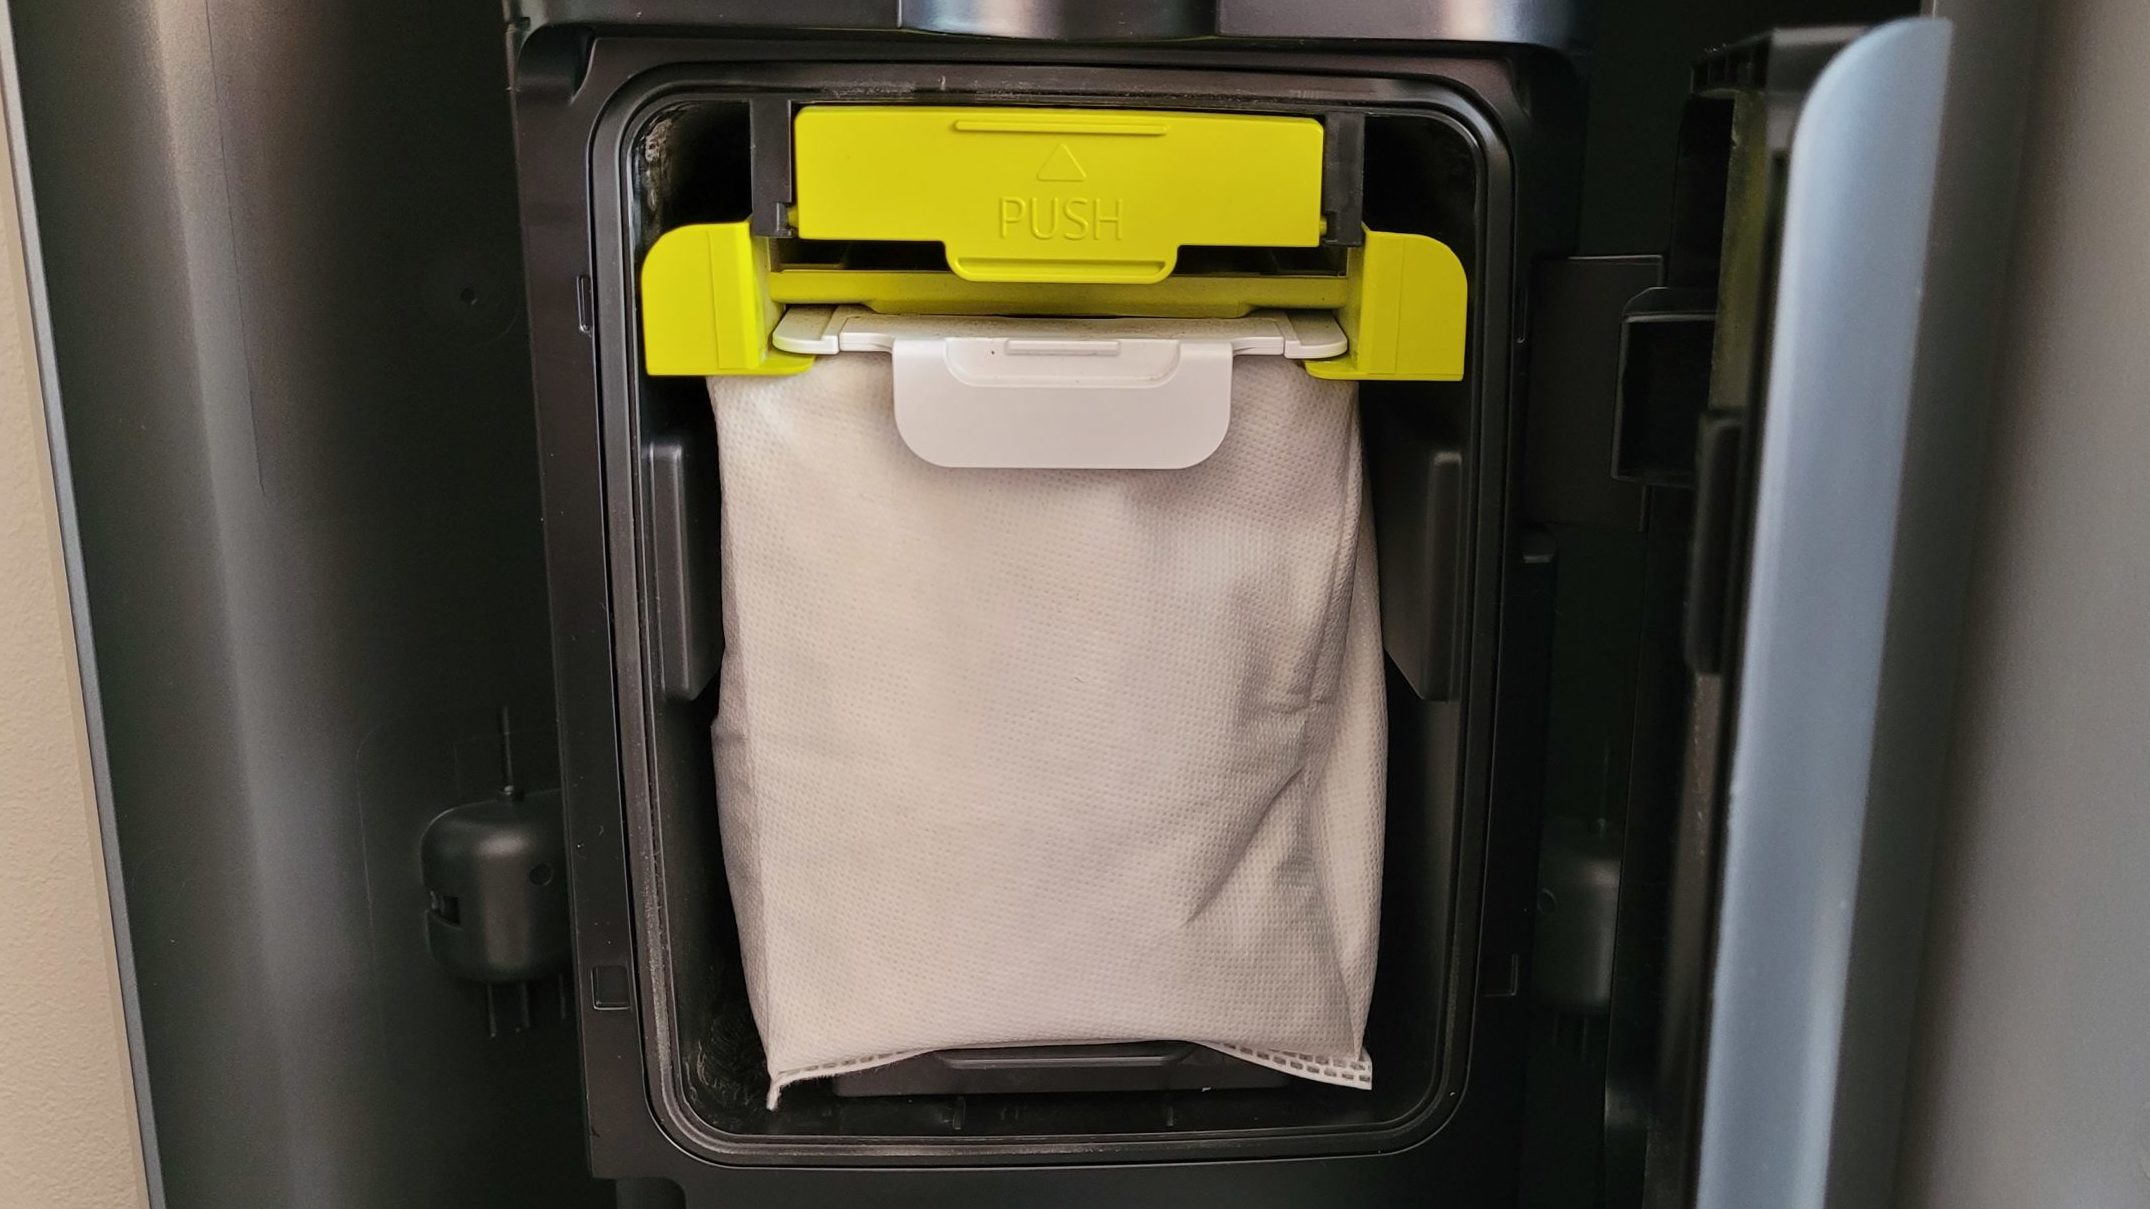 The LG CordZero features an all-in-one tower with a disposable bag